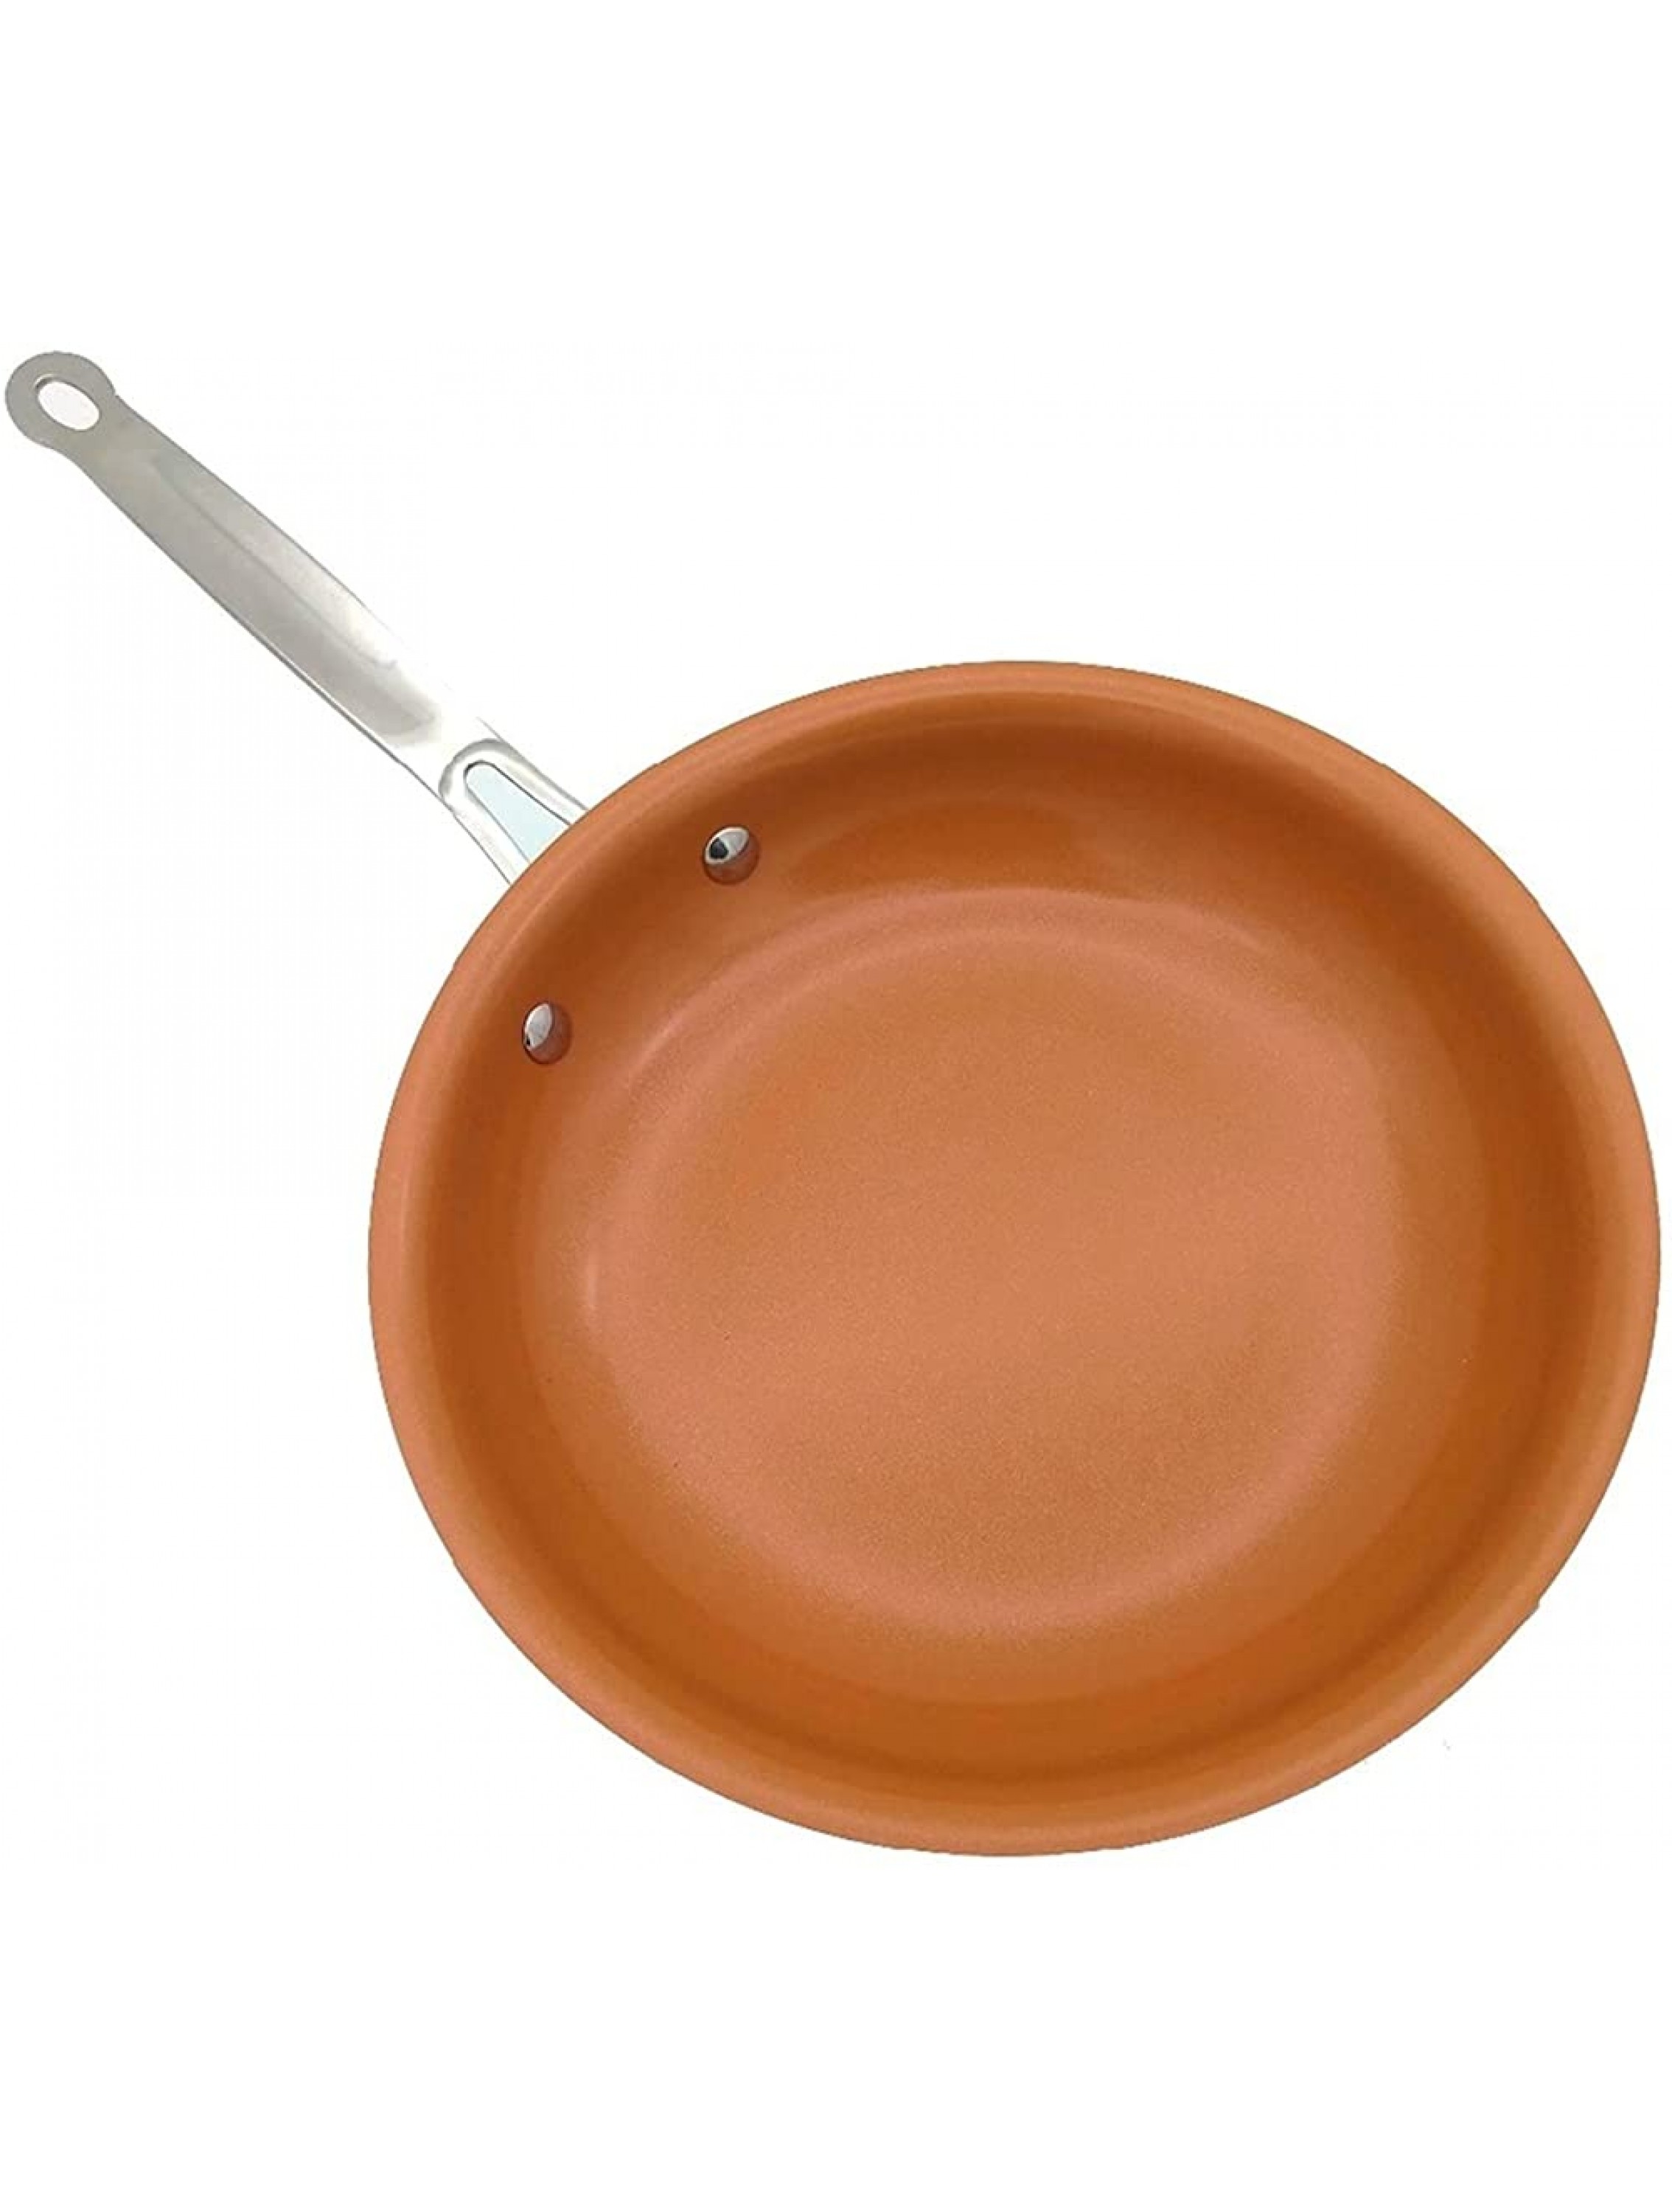 SHUOG Non-stick Copper Frying Pan With Ceramic Coating And Induction Cooking,Oven & Dishwasher Safe 10 Inches Chef's Pans - BFUIEC6PD